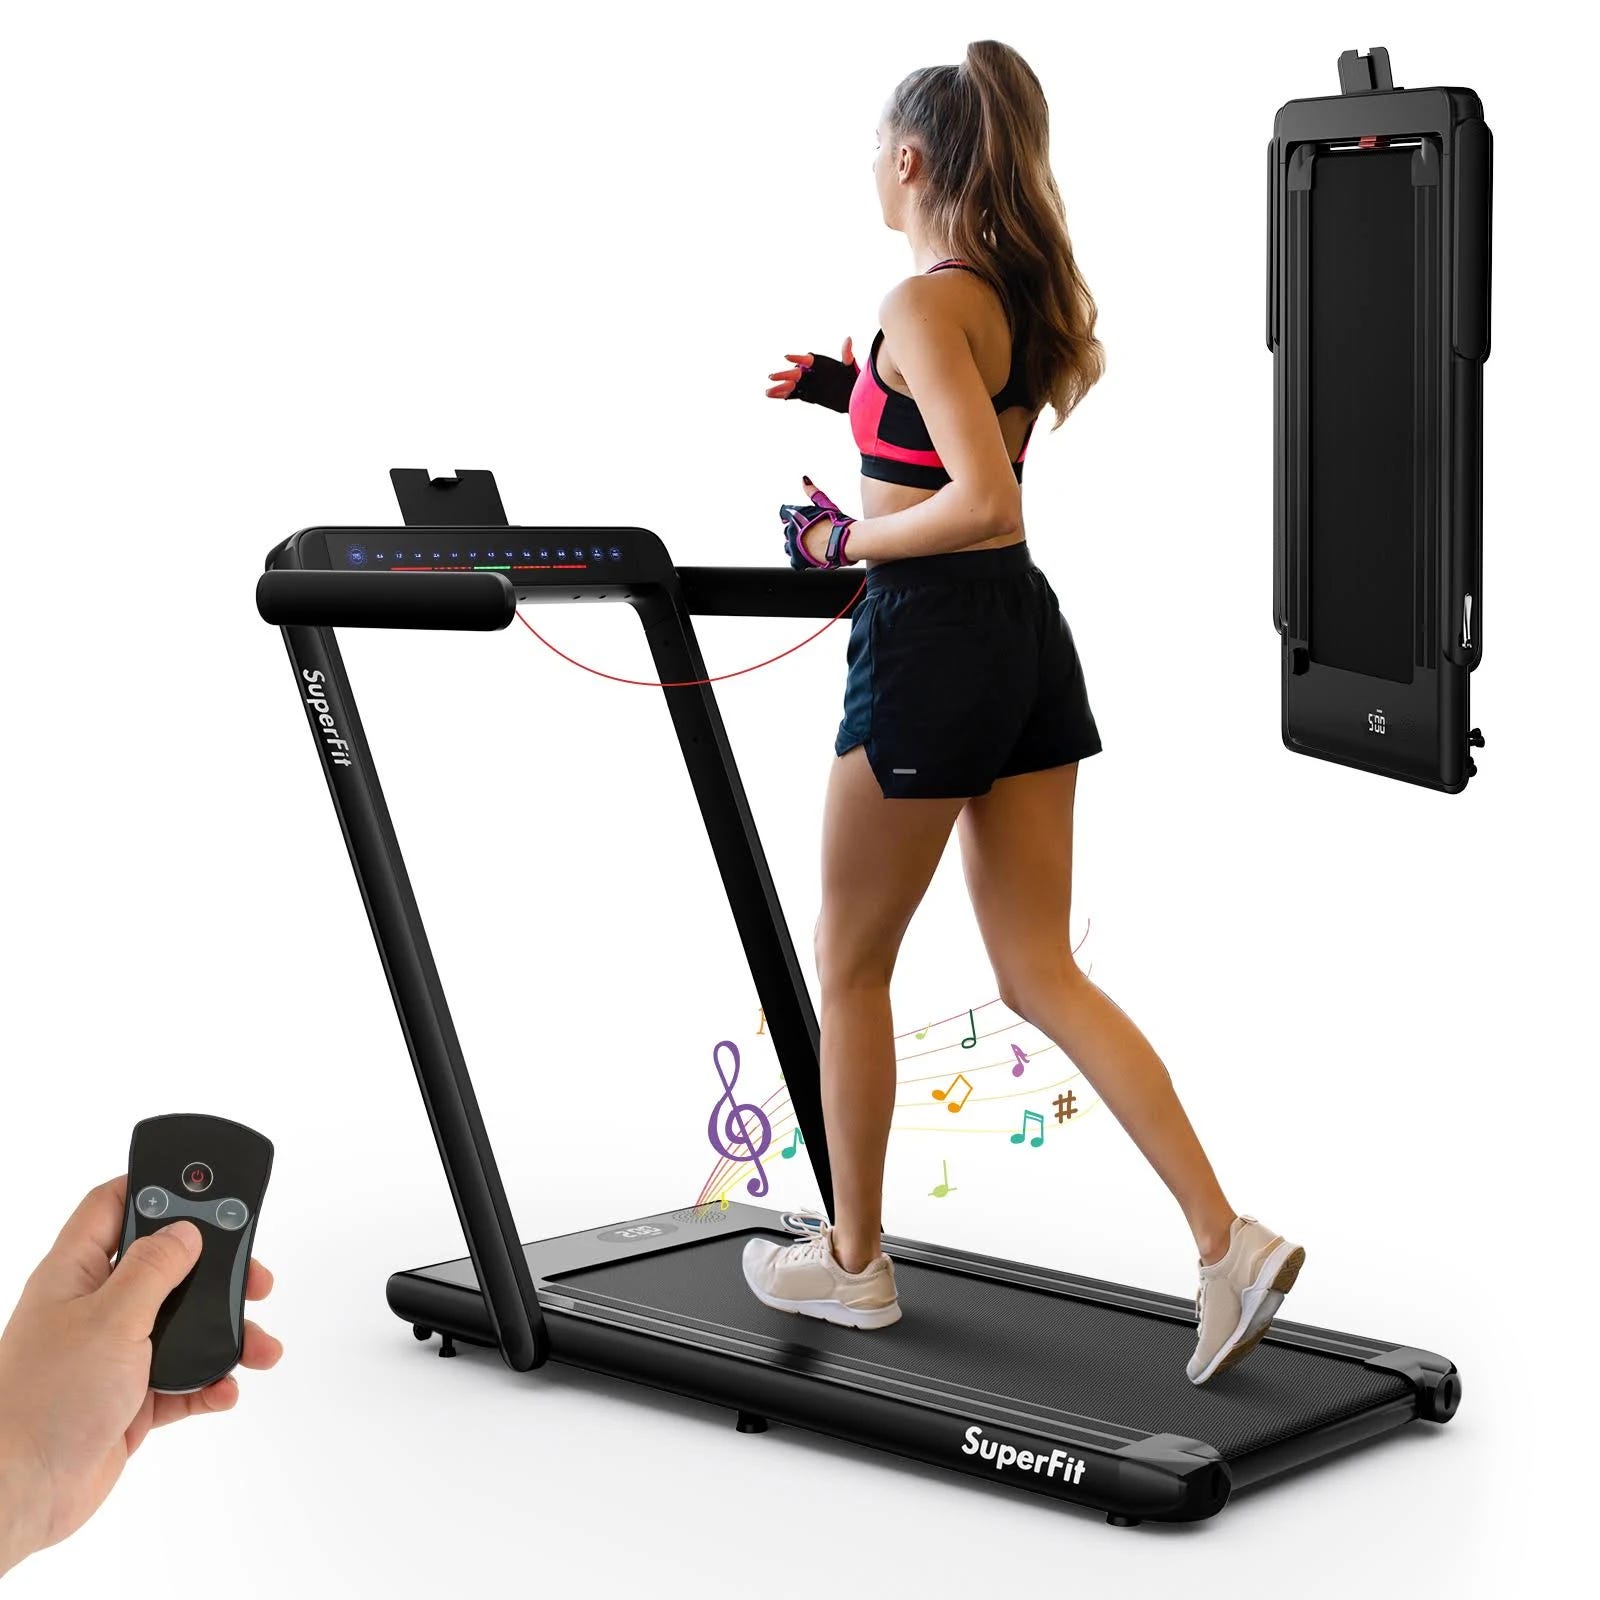 SuperFit 2.25HP Folding Treadmill with Speaker in Black | Image